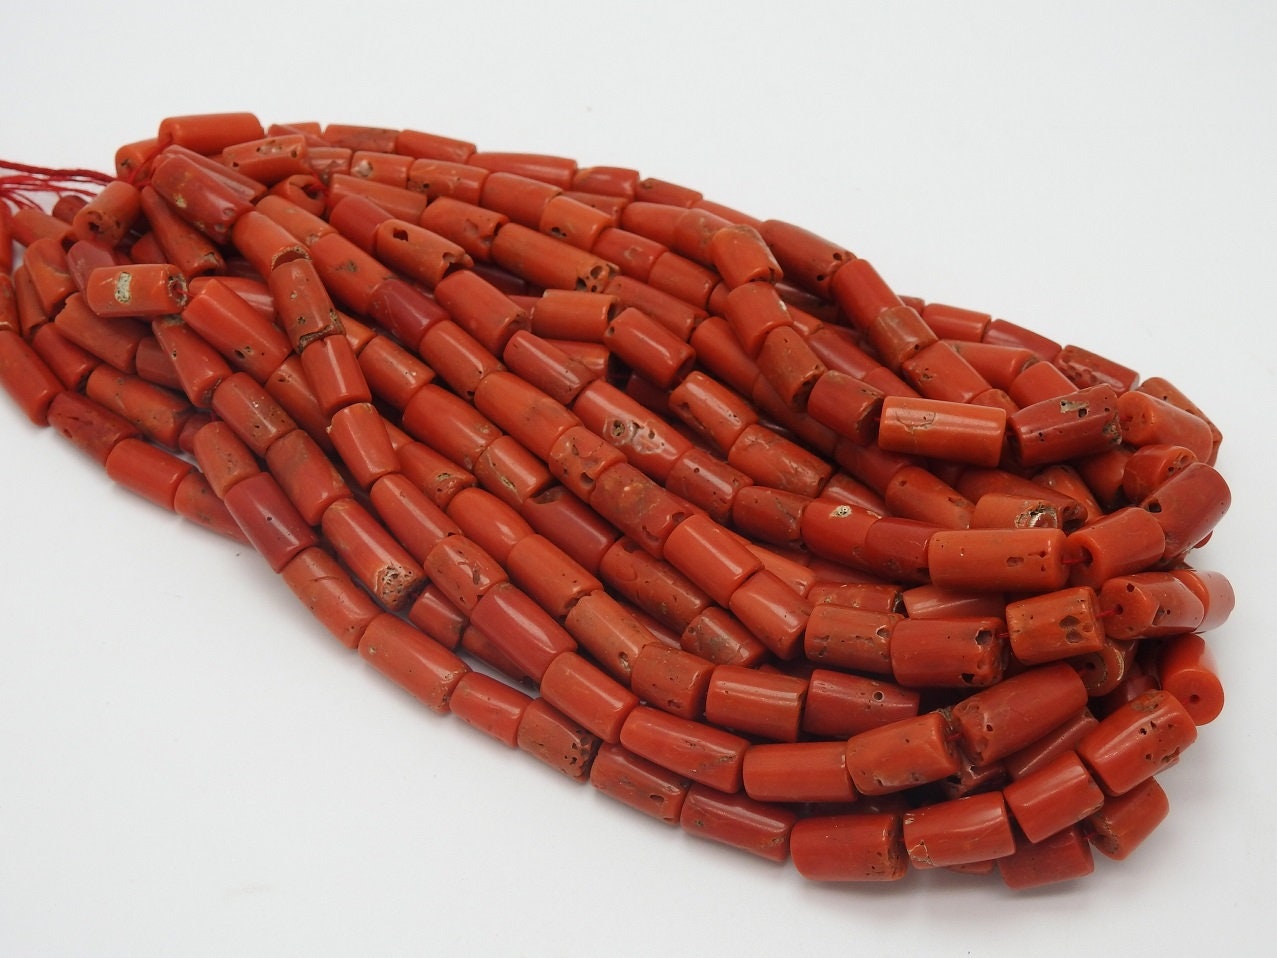 Natural Red Coral Smooth Tube,Drum,Cylinder Shape Beads,Handmade,Loose Stone,For Making Jewelry,Wholesaler,Supplies 100%Natural (bk)CR2 | Save 33% - Rajasthan Living 14